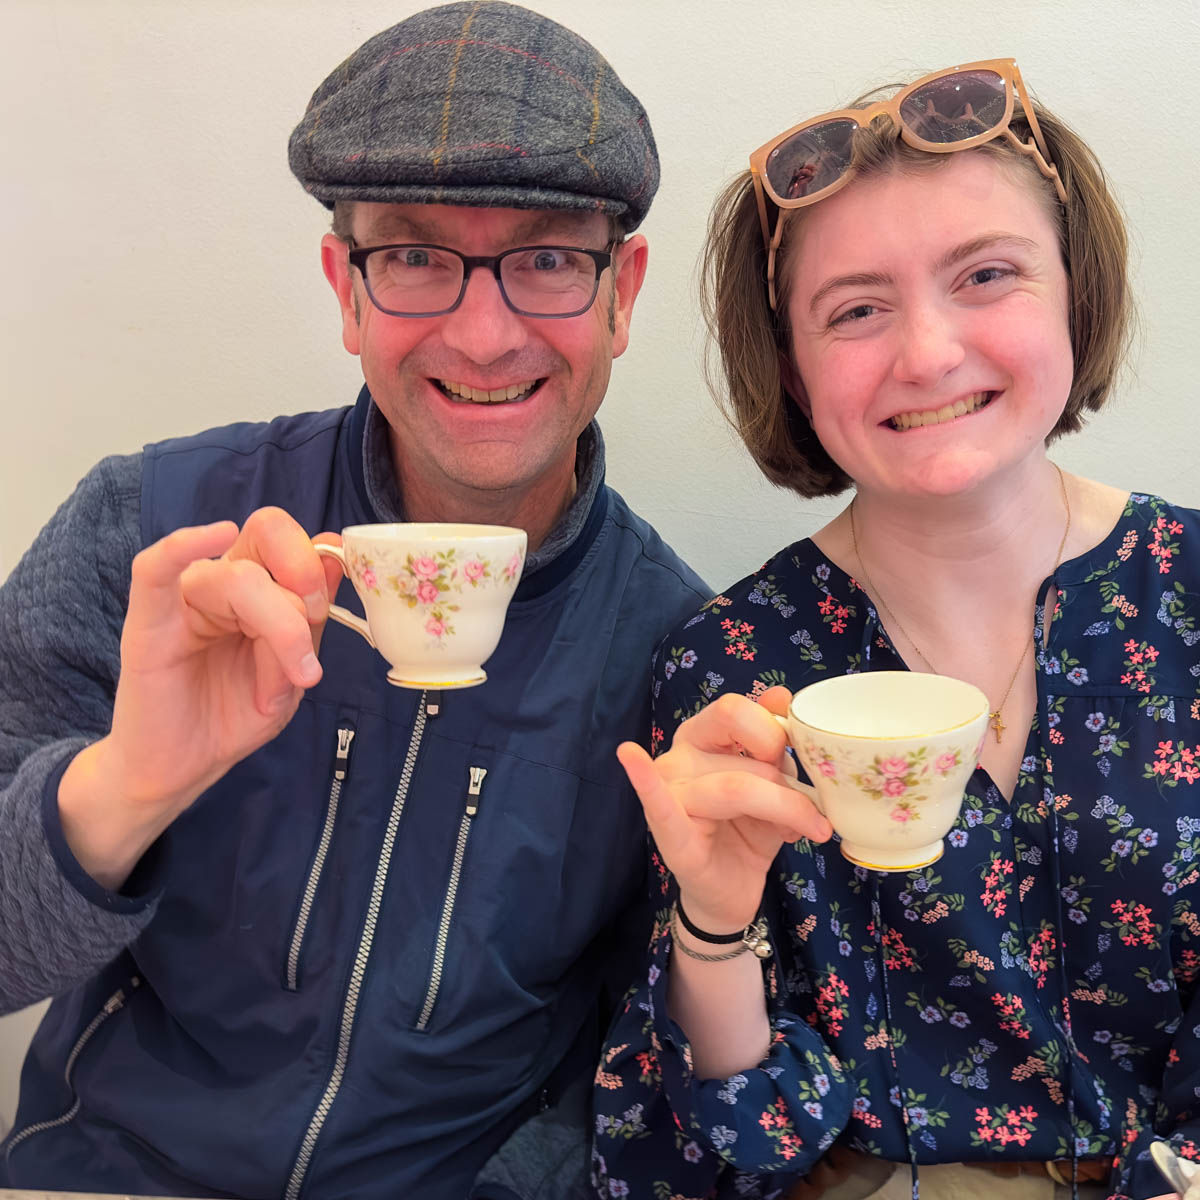 A dad and his daughter drink tea by holding their tea cups with their pinkies up.